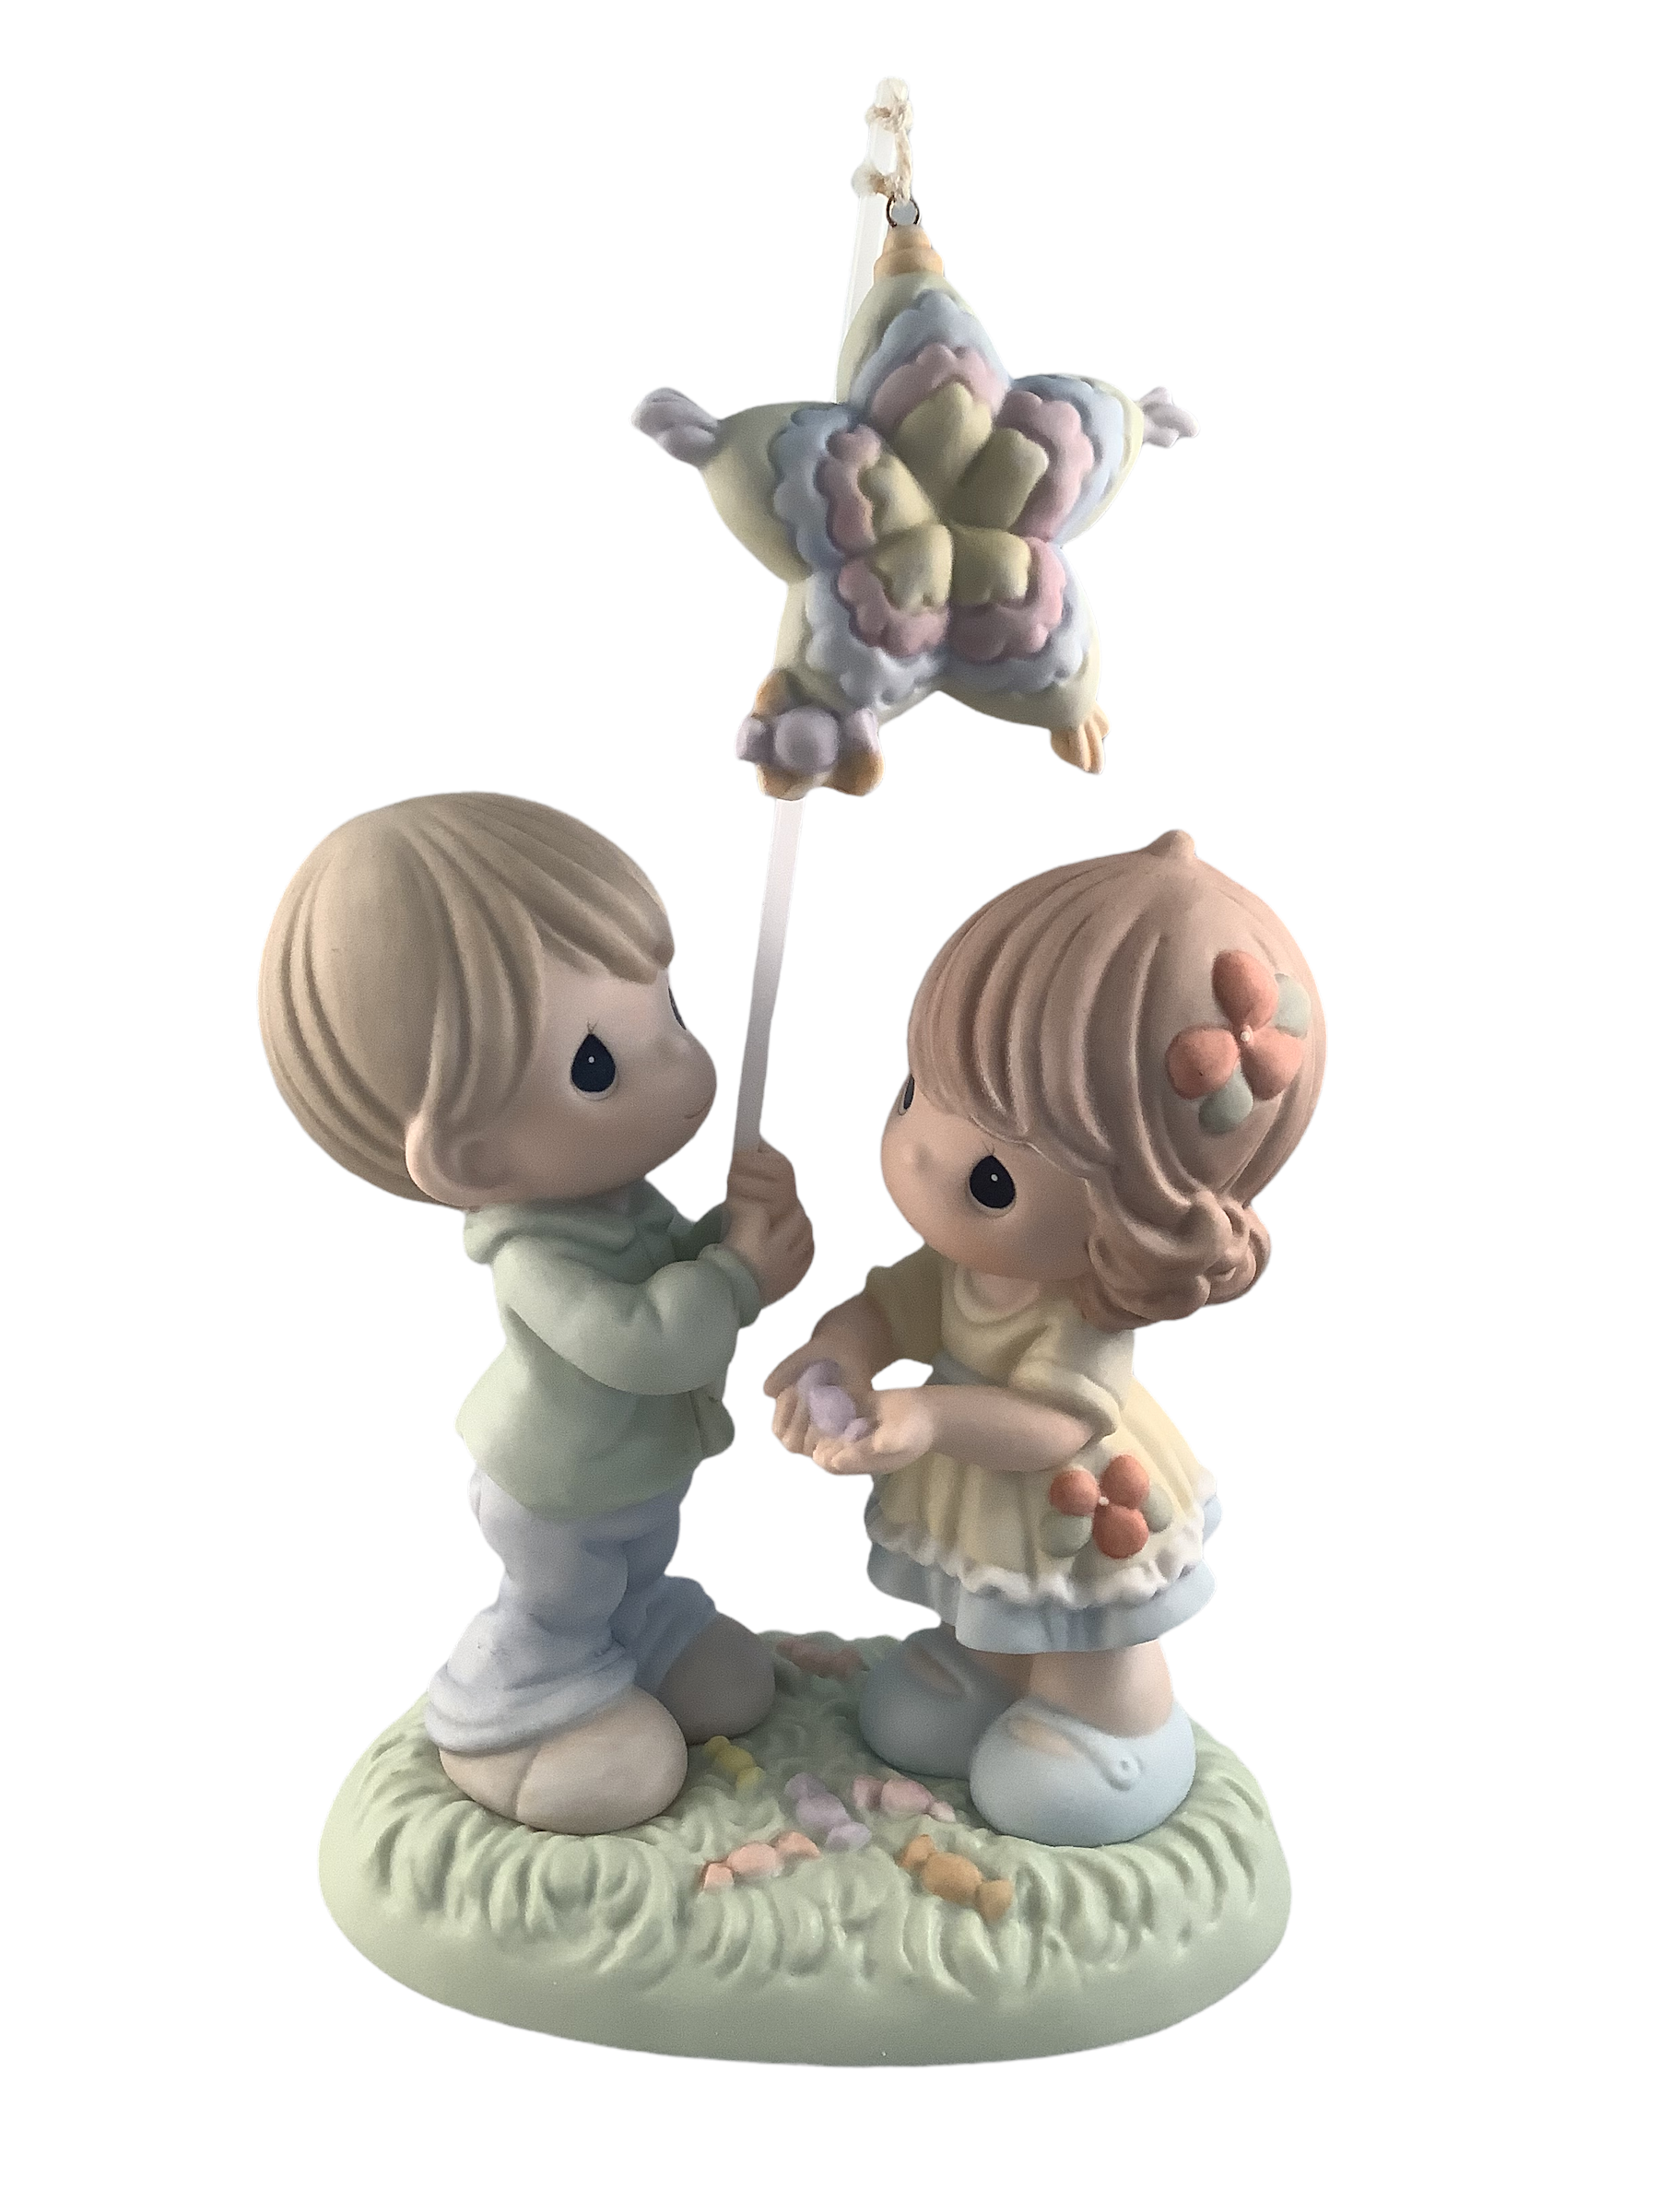 May Sweetness And Love Shower Down On You - Precious Moment Figurine